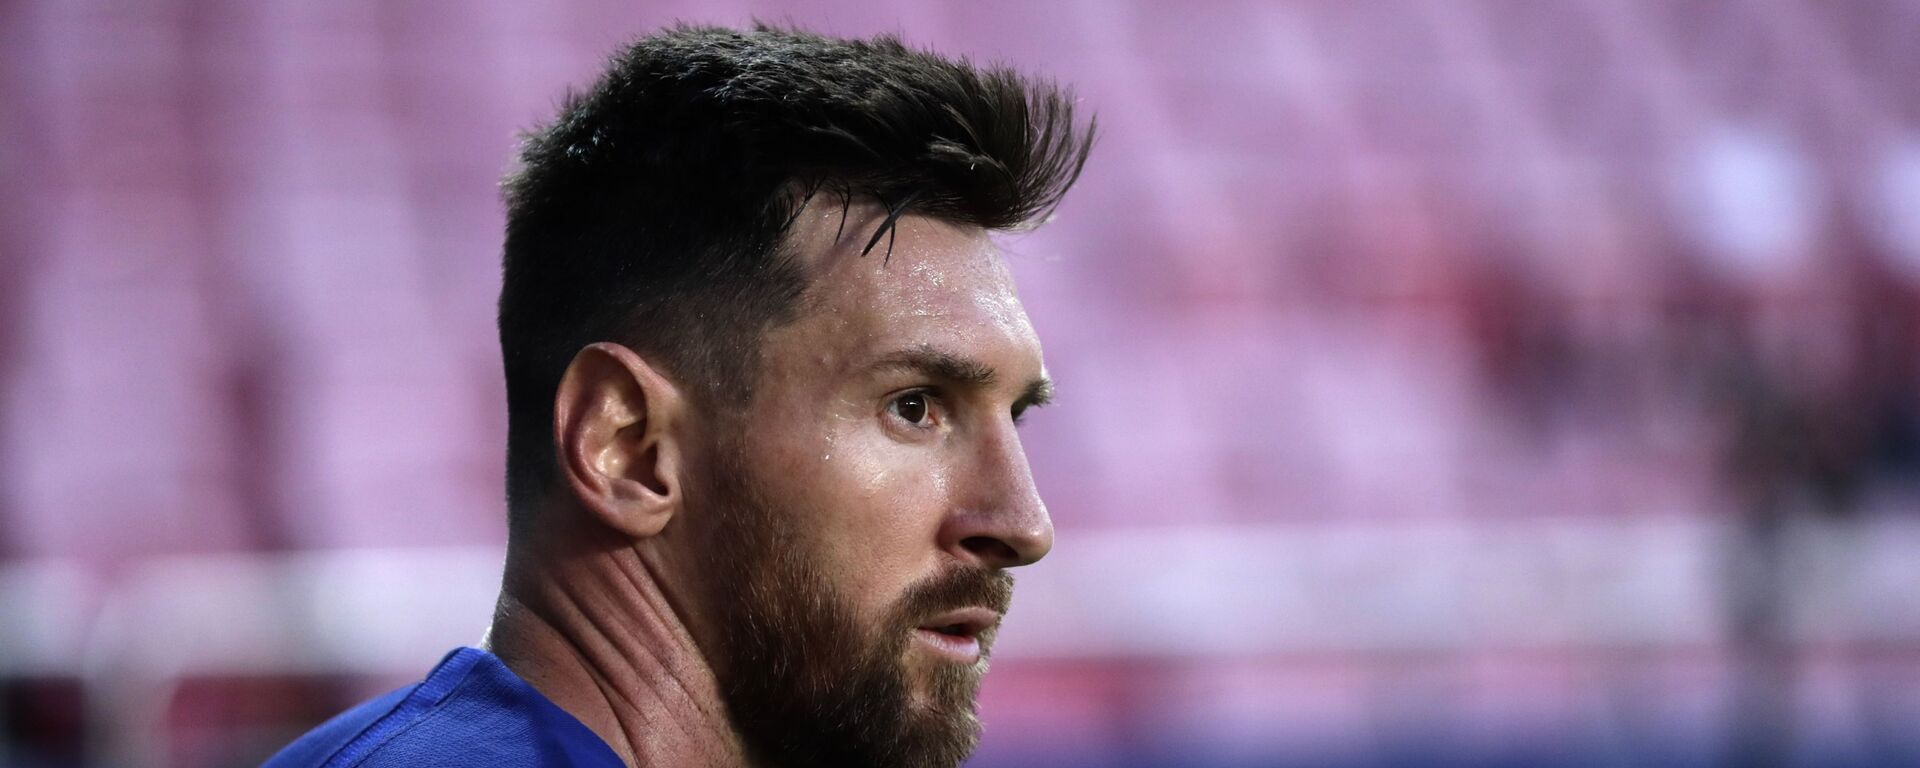 Barcelona's Lionel Messi looks on during the Champions League quarterfinal match between FC Barcelona and Bayern Munich at the Luz stadium in Lisbon, Portugal, Friday, 14 August 2020. - Sputnik International, 1920, 31.03.2021